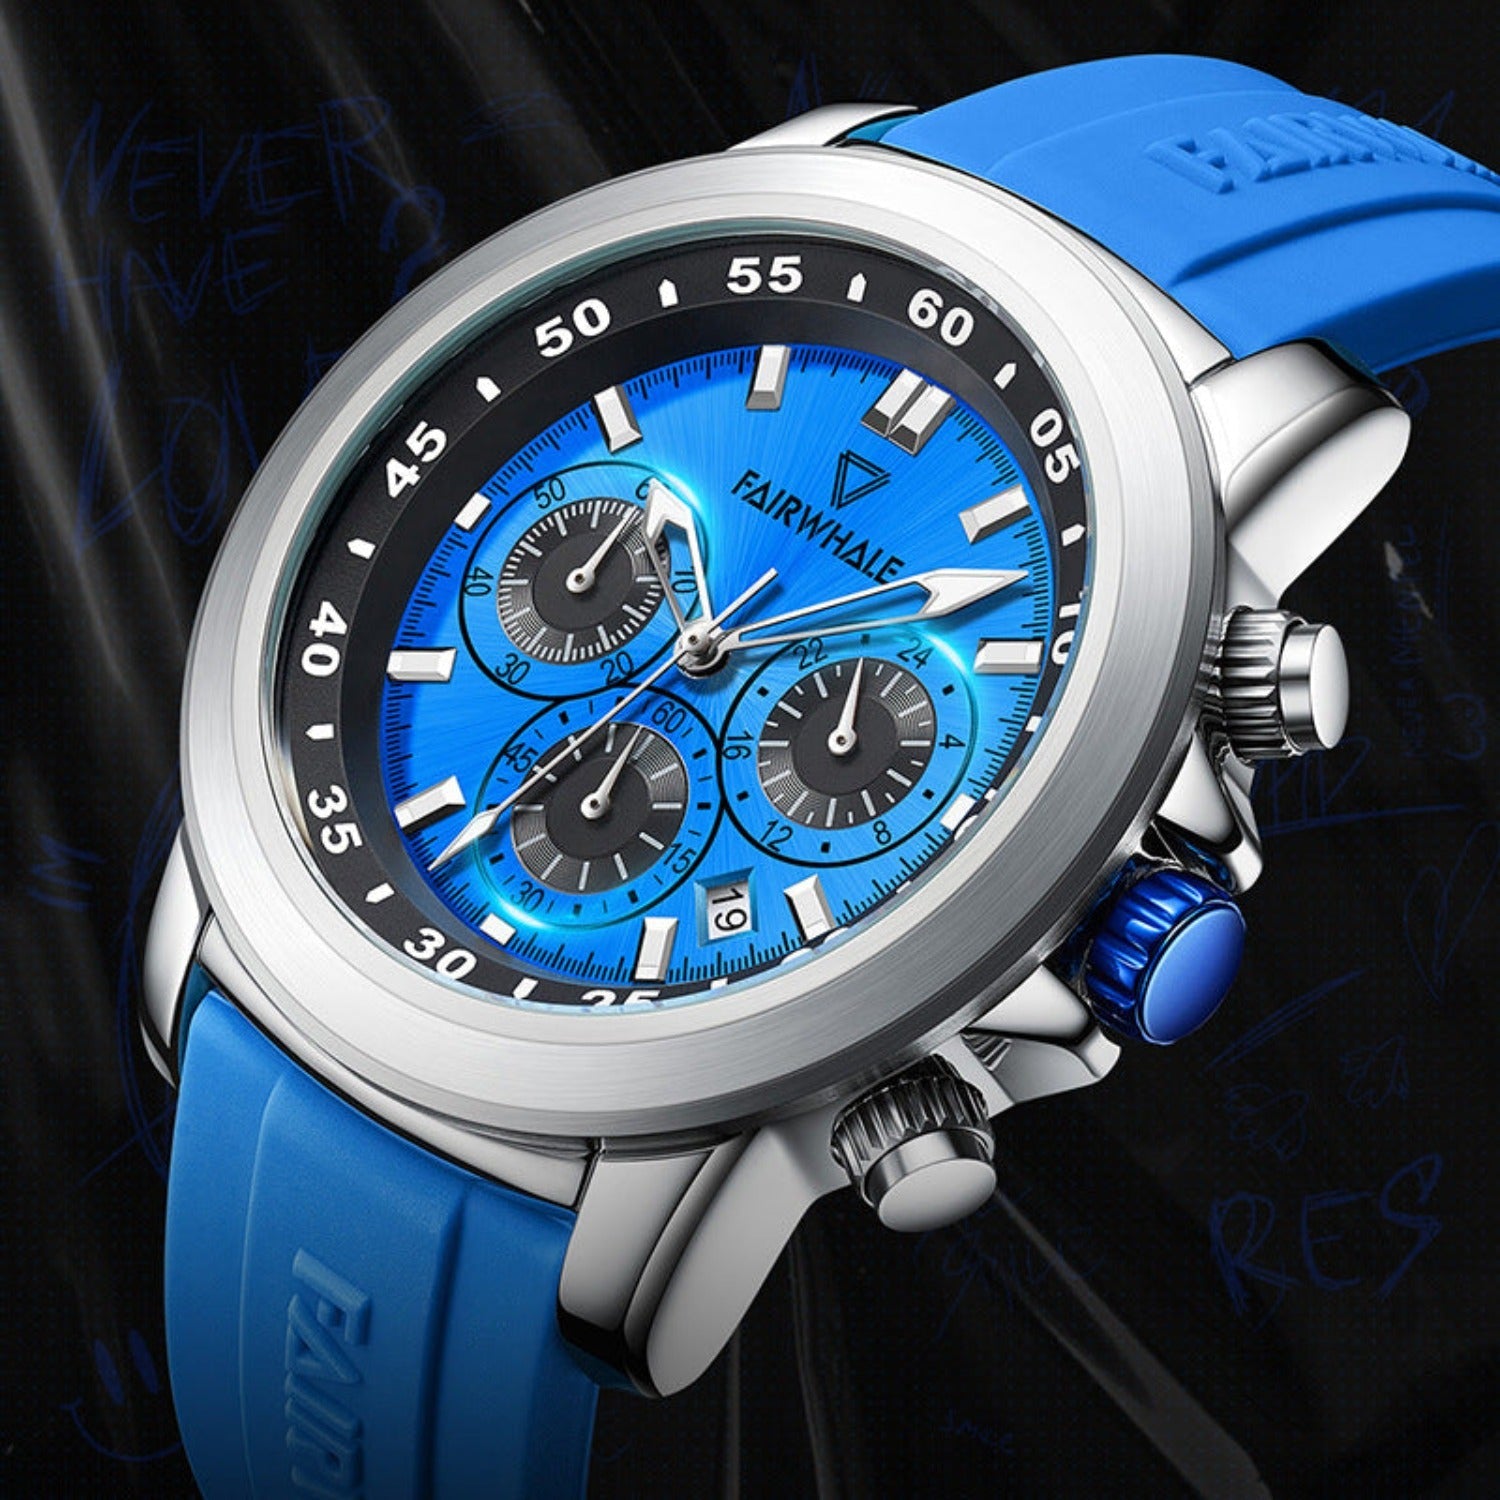 Luxury Men's Automatic Watch with Date Window, Luminous Hands, and Water Resistance LA ROSE BEAUTY